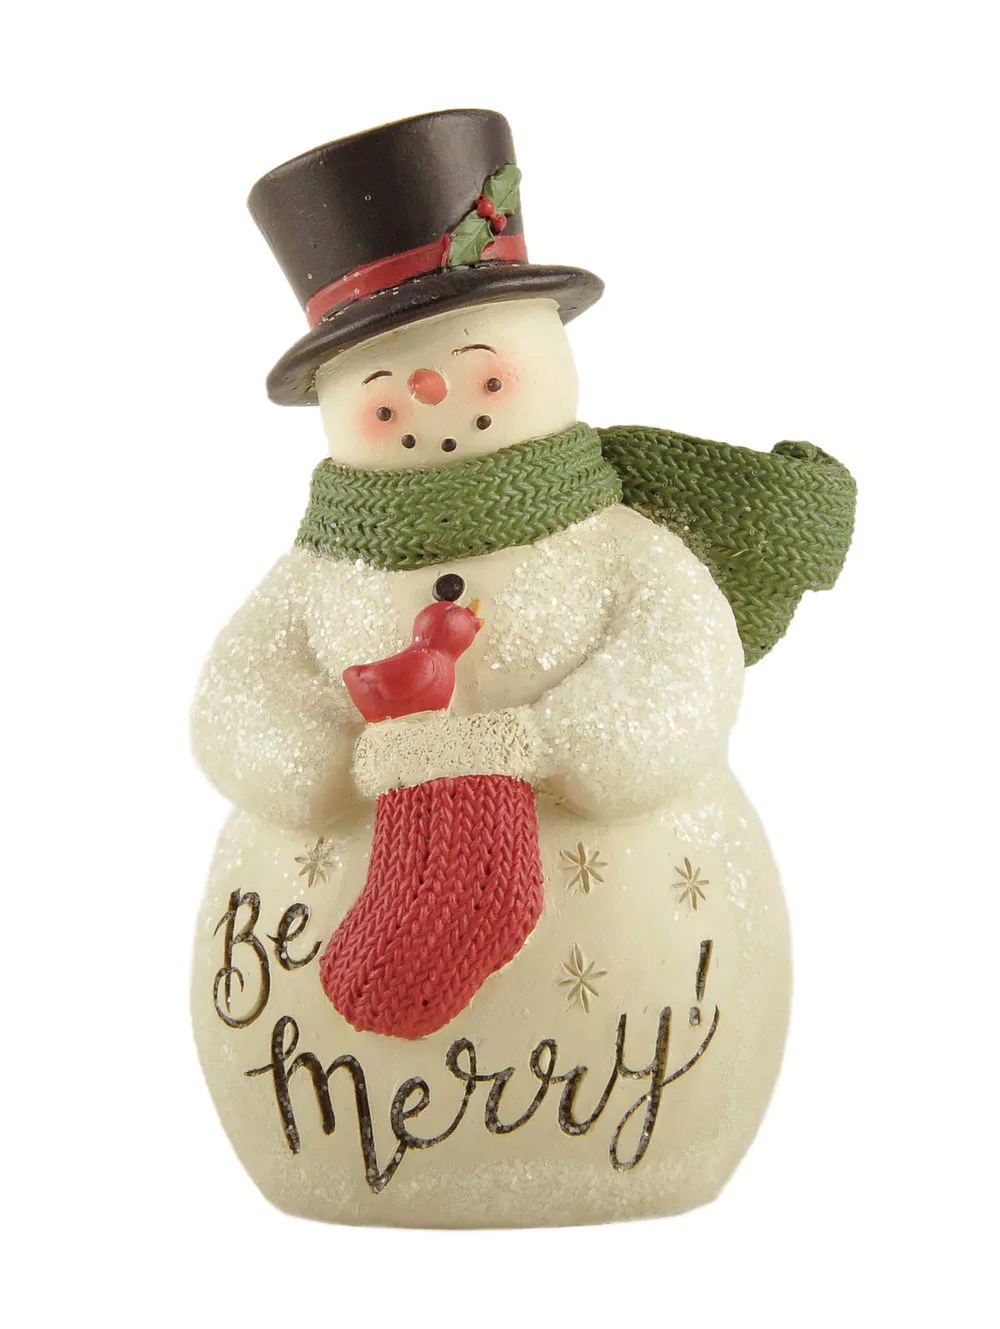 Festive Gentleman - Handcrafted Resin Snowman with Top Hat and Holly, a Merry Addition to Your Holiday Decor 238-13793